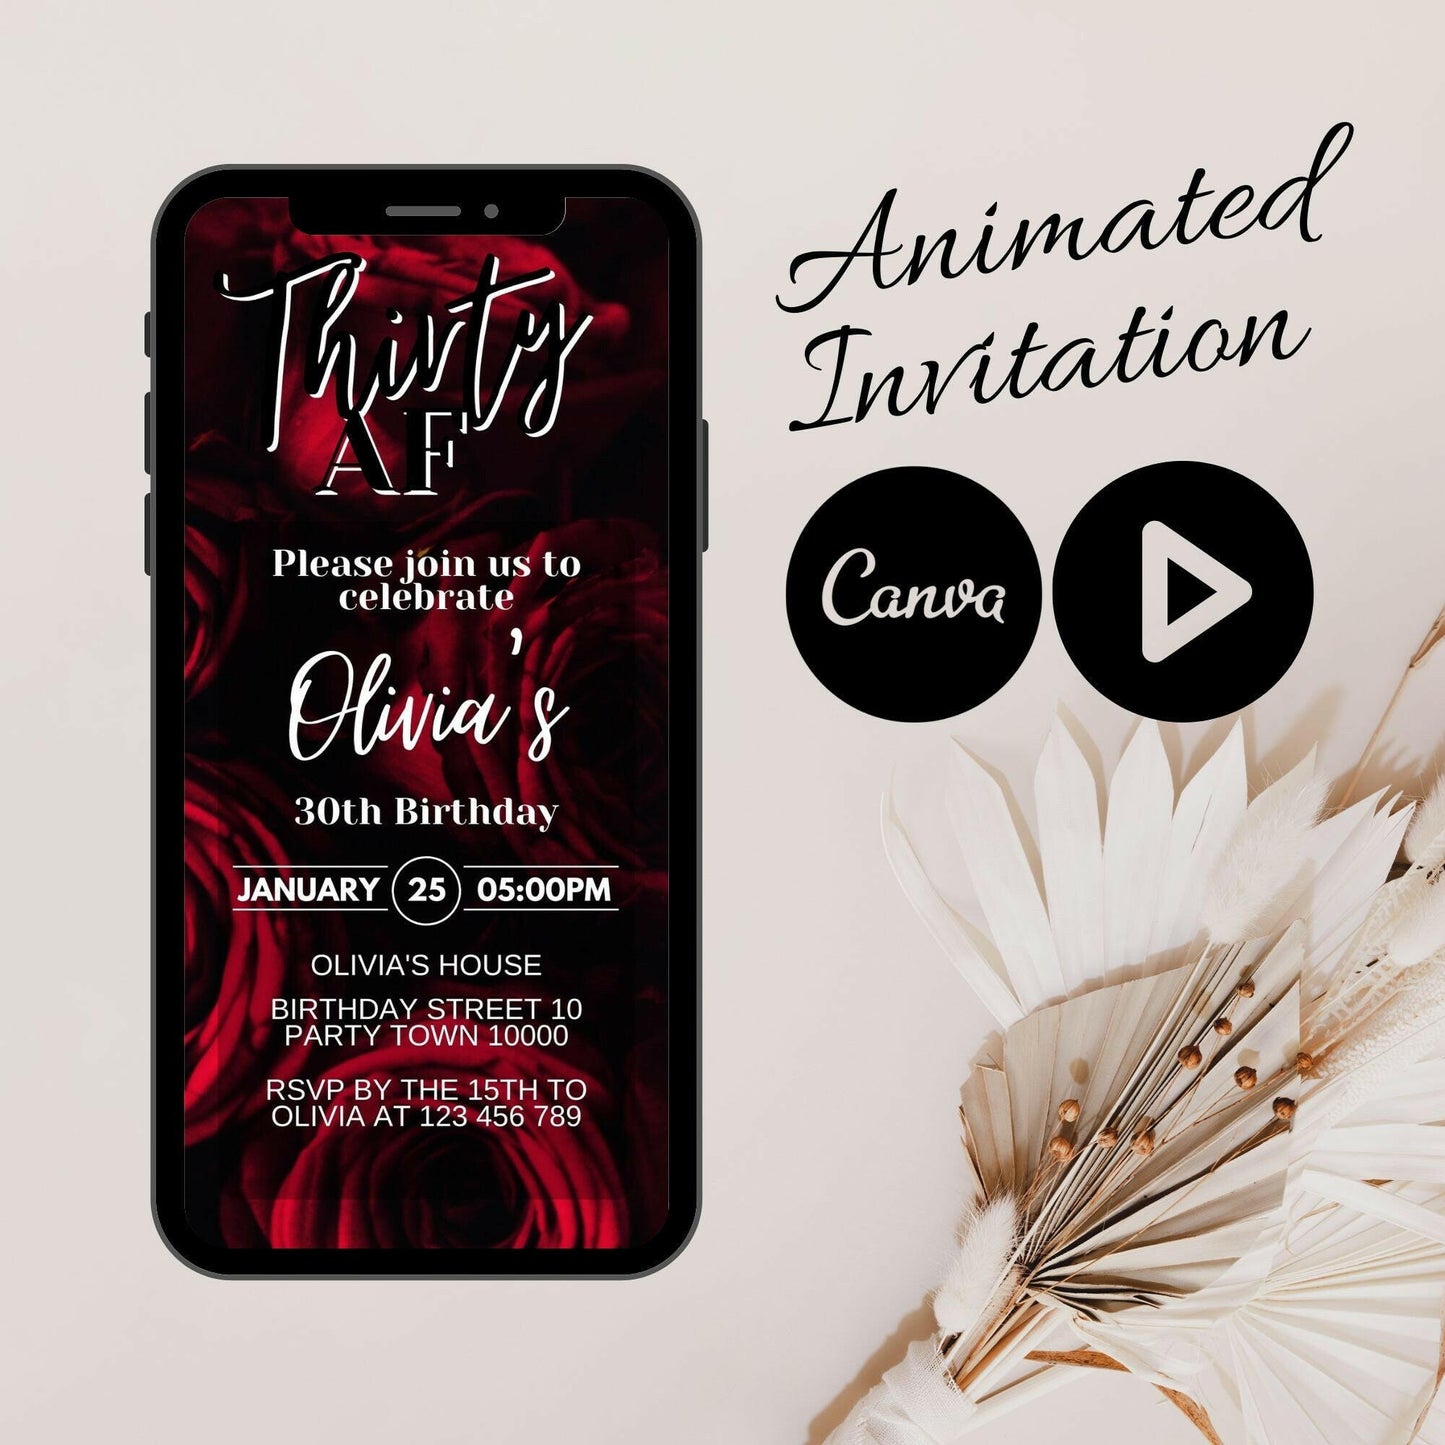 Thirty AF: Animated Video Invitation for Her Birthday Party with Mobile Option and Modern Canva Invitation - Let's Celebrate!